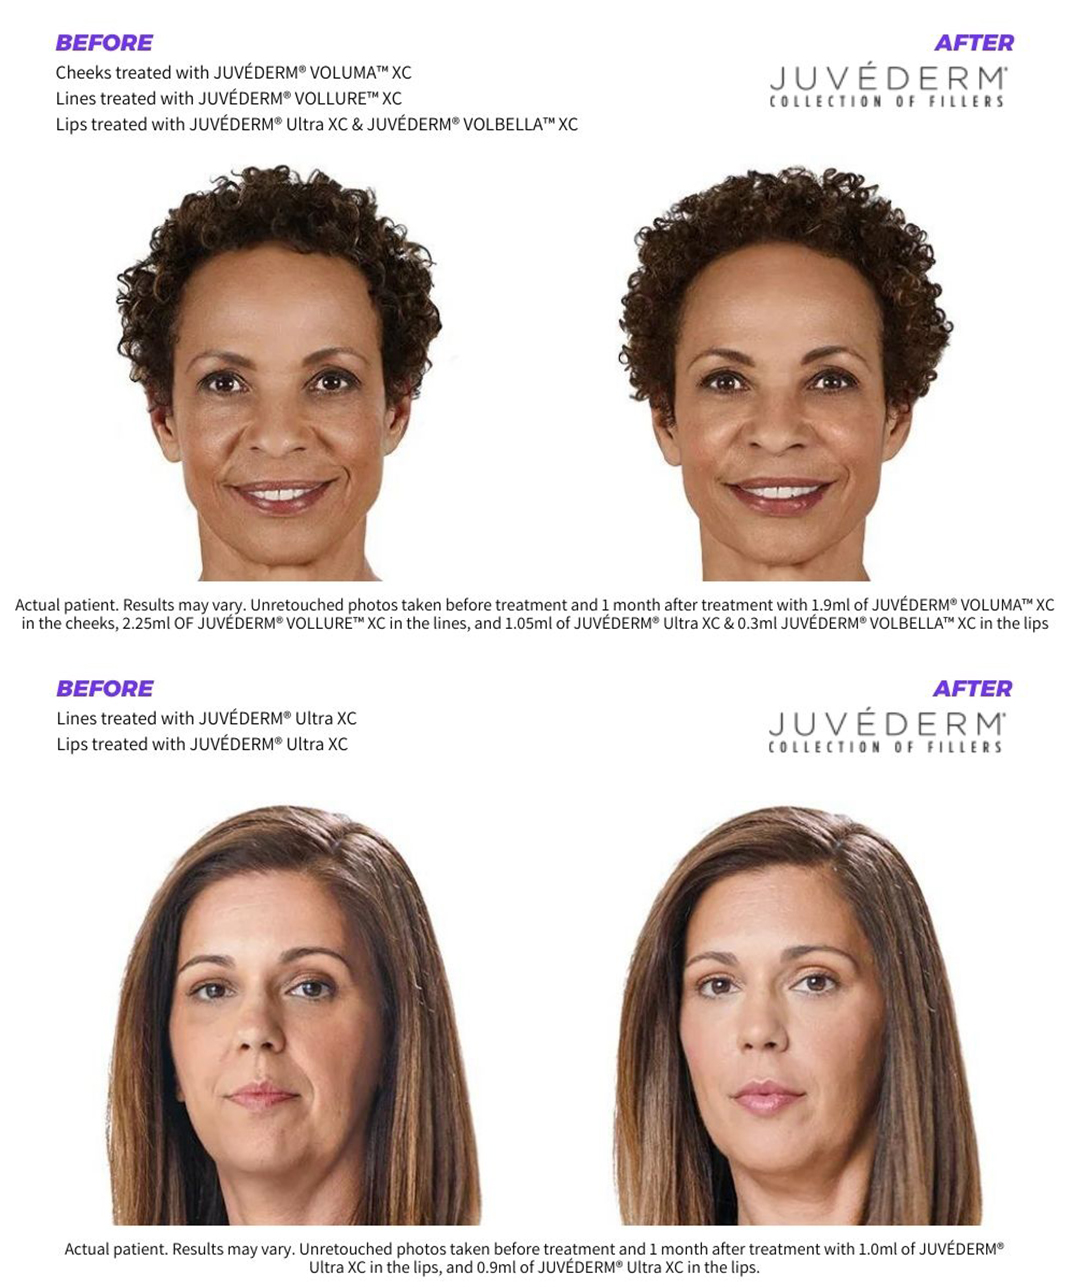 Before and after images of two women who have restored facial contours with Juvederm dermal fillers.